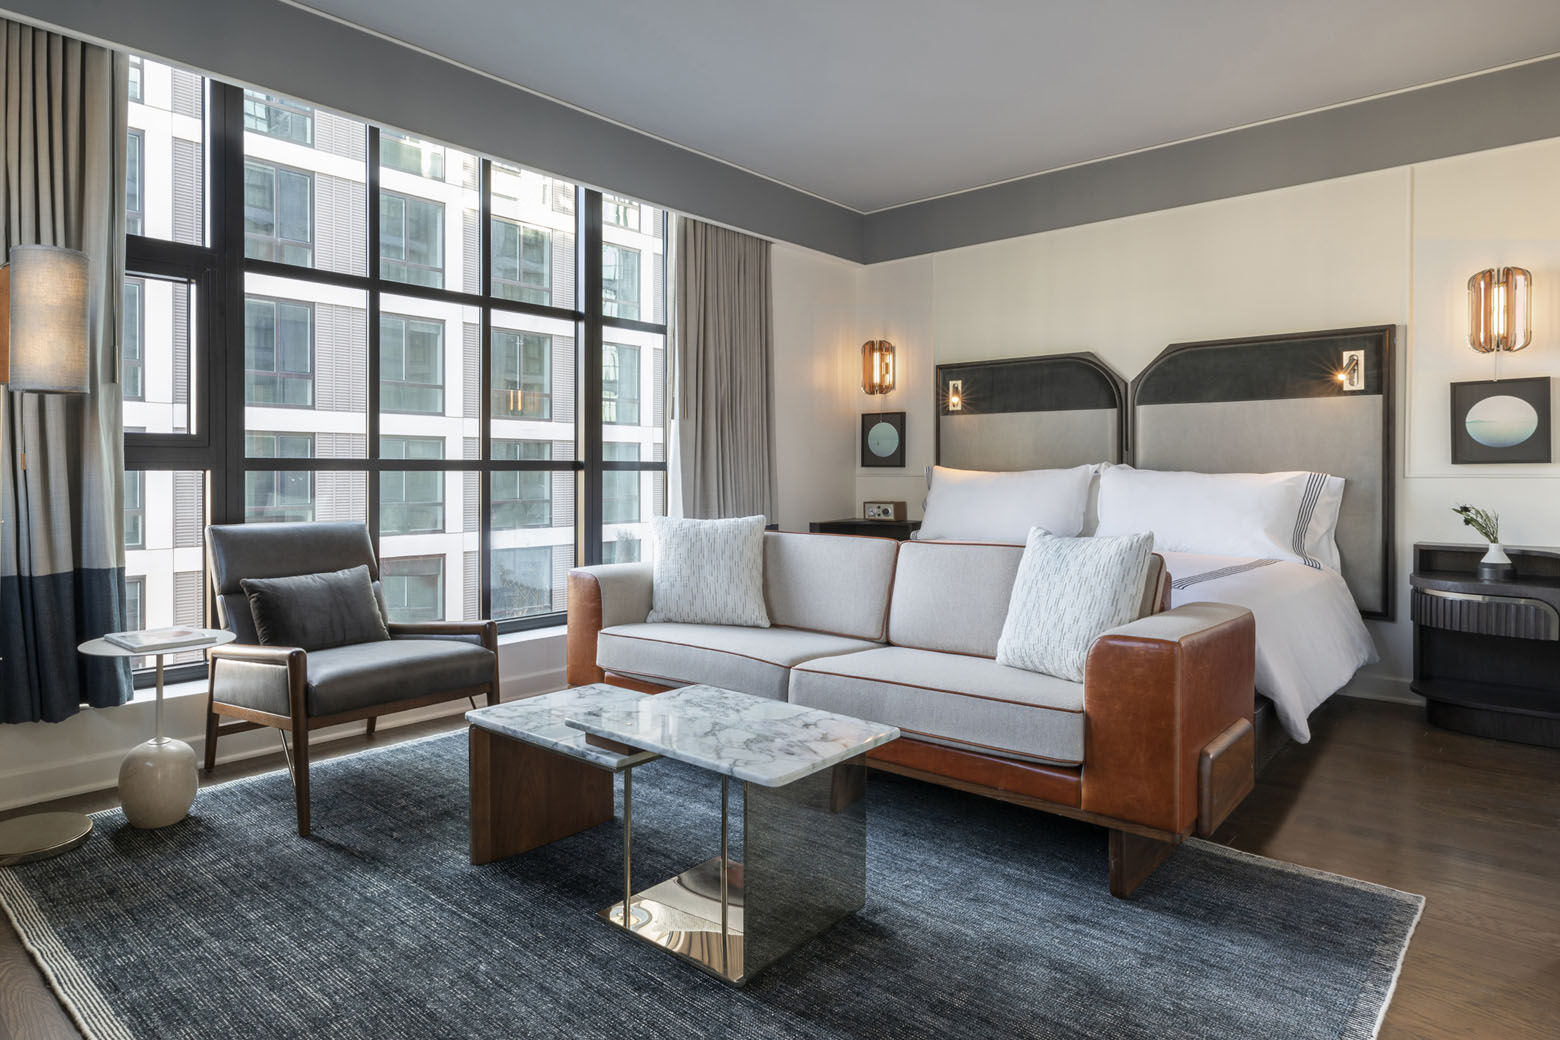 A look at the bedroom in a suite at the Thompson D.C. in the Capitol Riverfront's Navy Yard Neighborhood. The hotel's 225 rooms and suites all have floor-to-ceiling windows and views of the Anacostia River and Nationals Park.